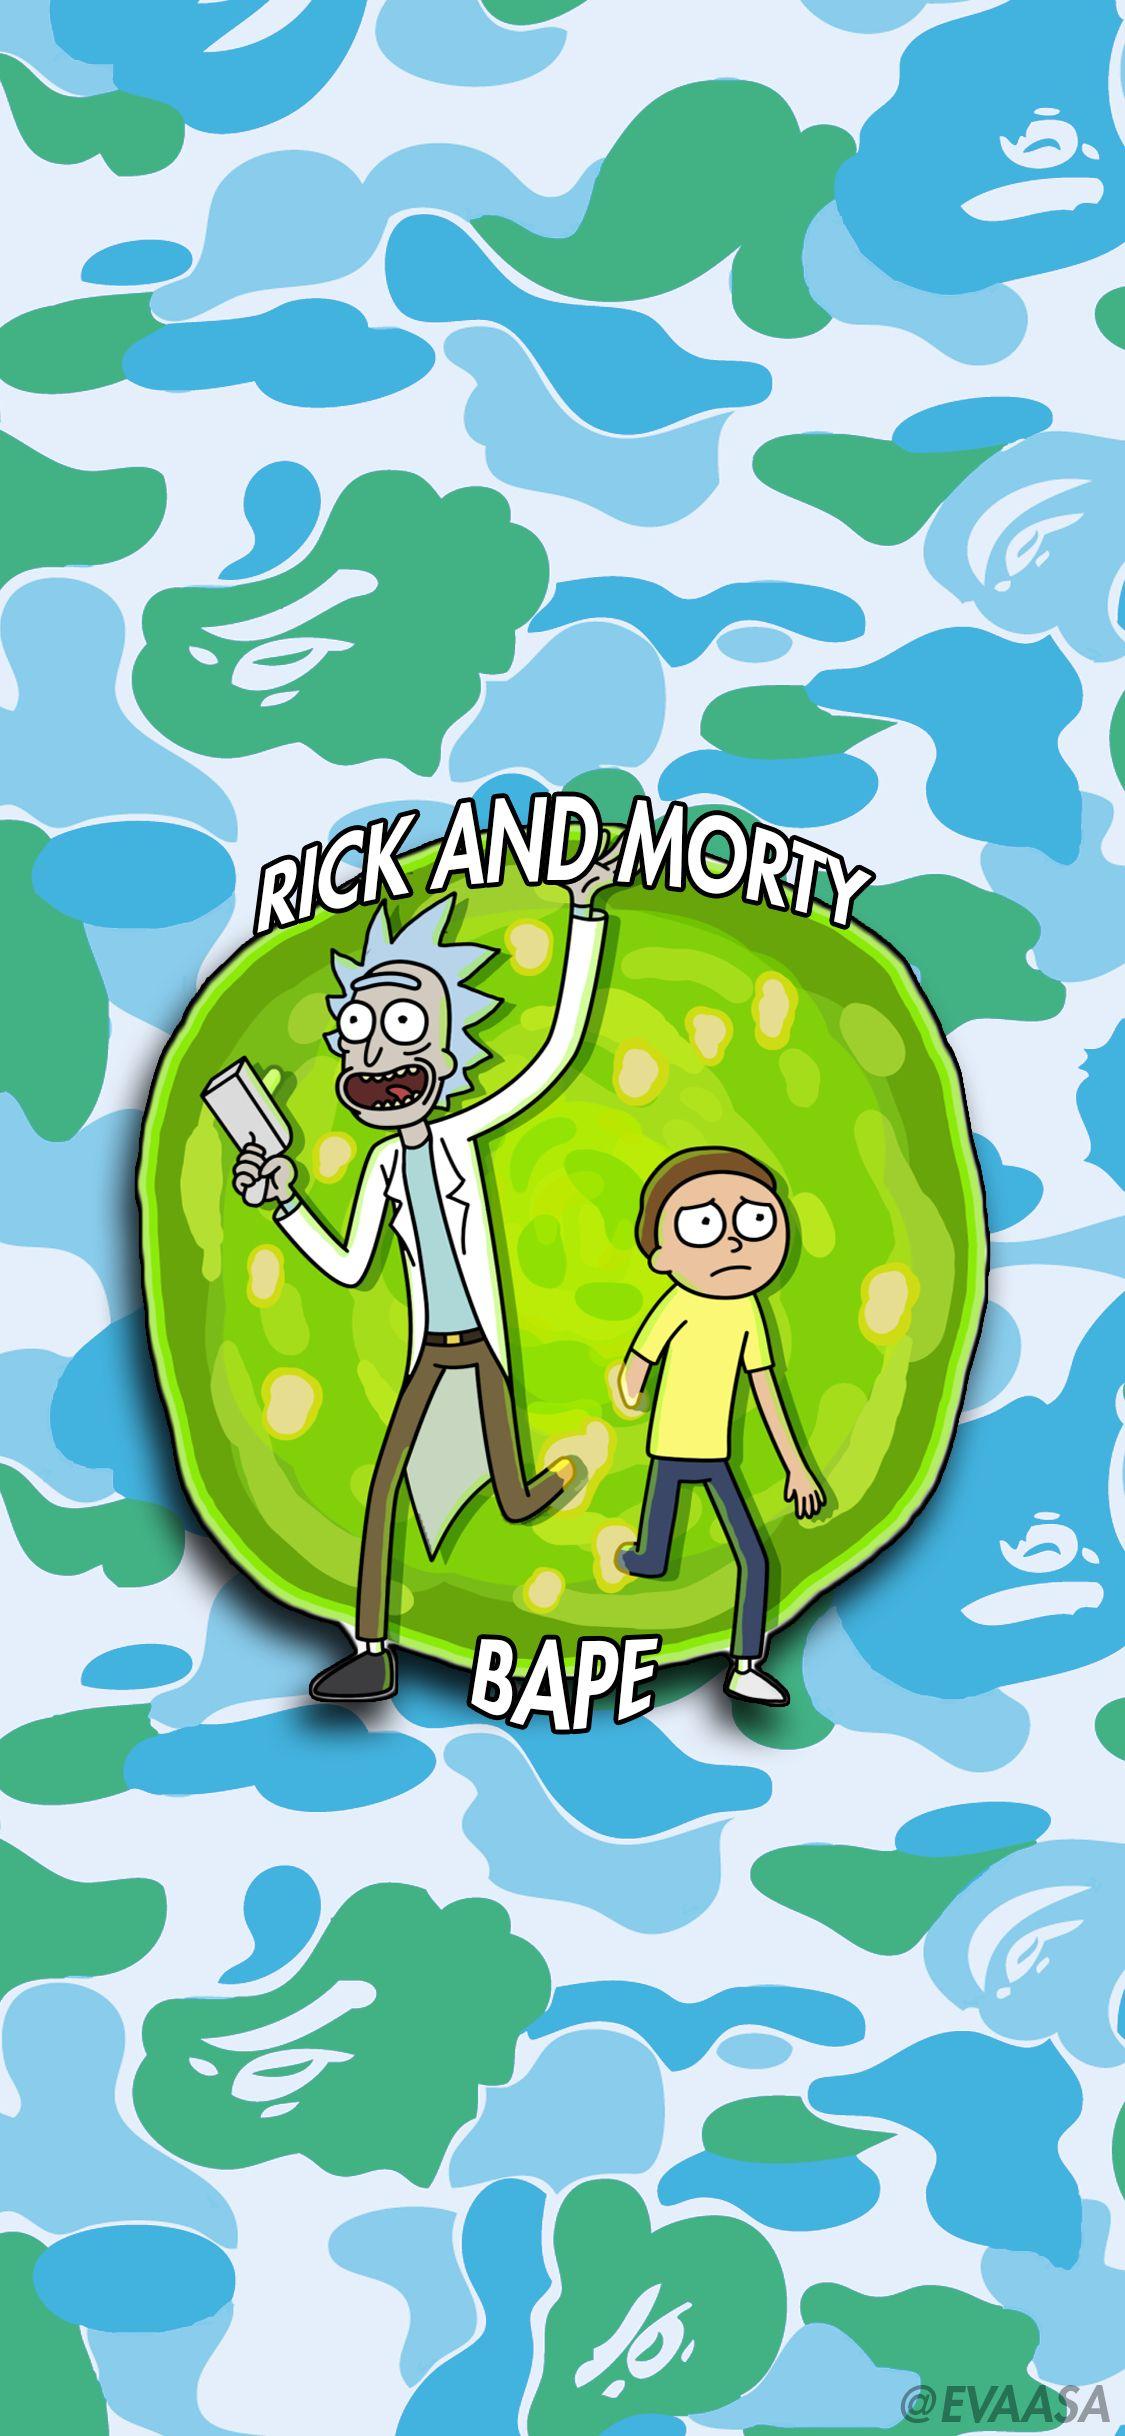 Rick and morty with bape backgrounds hype beast